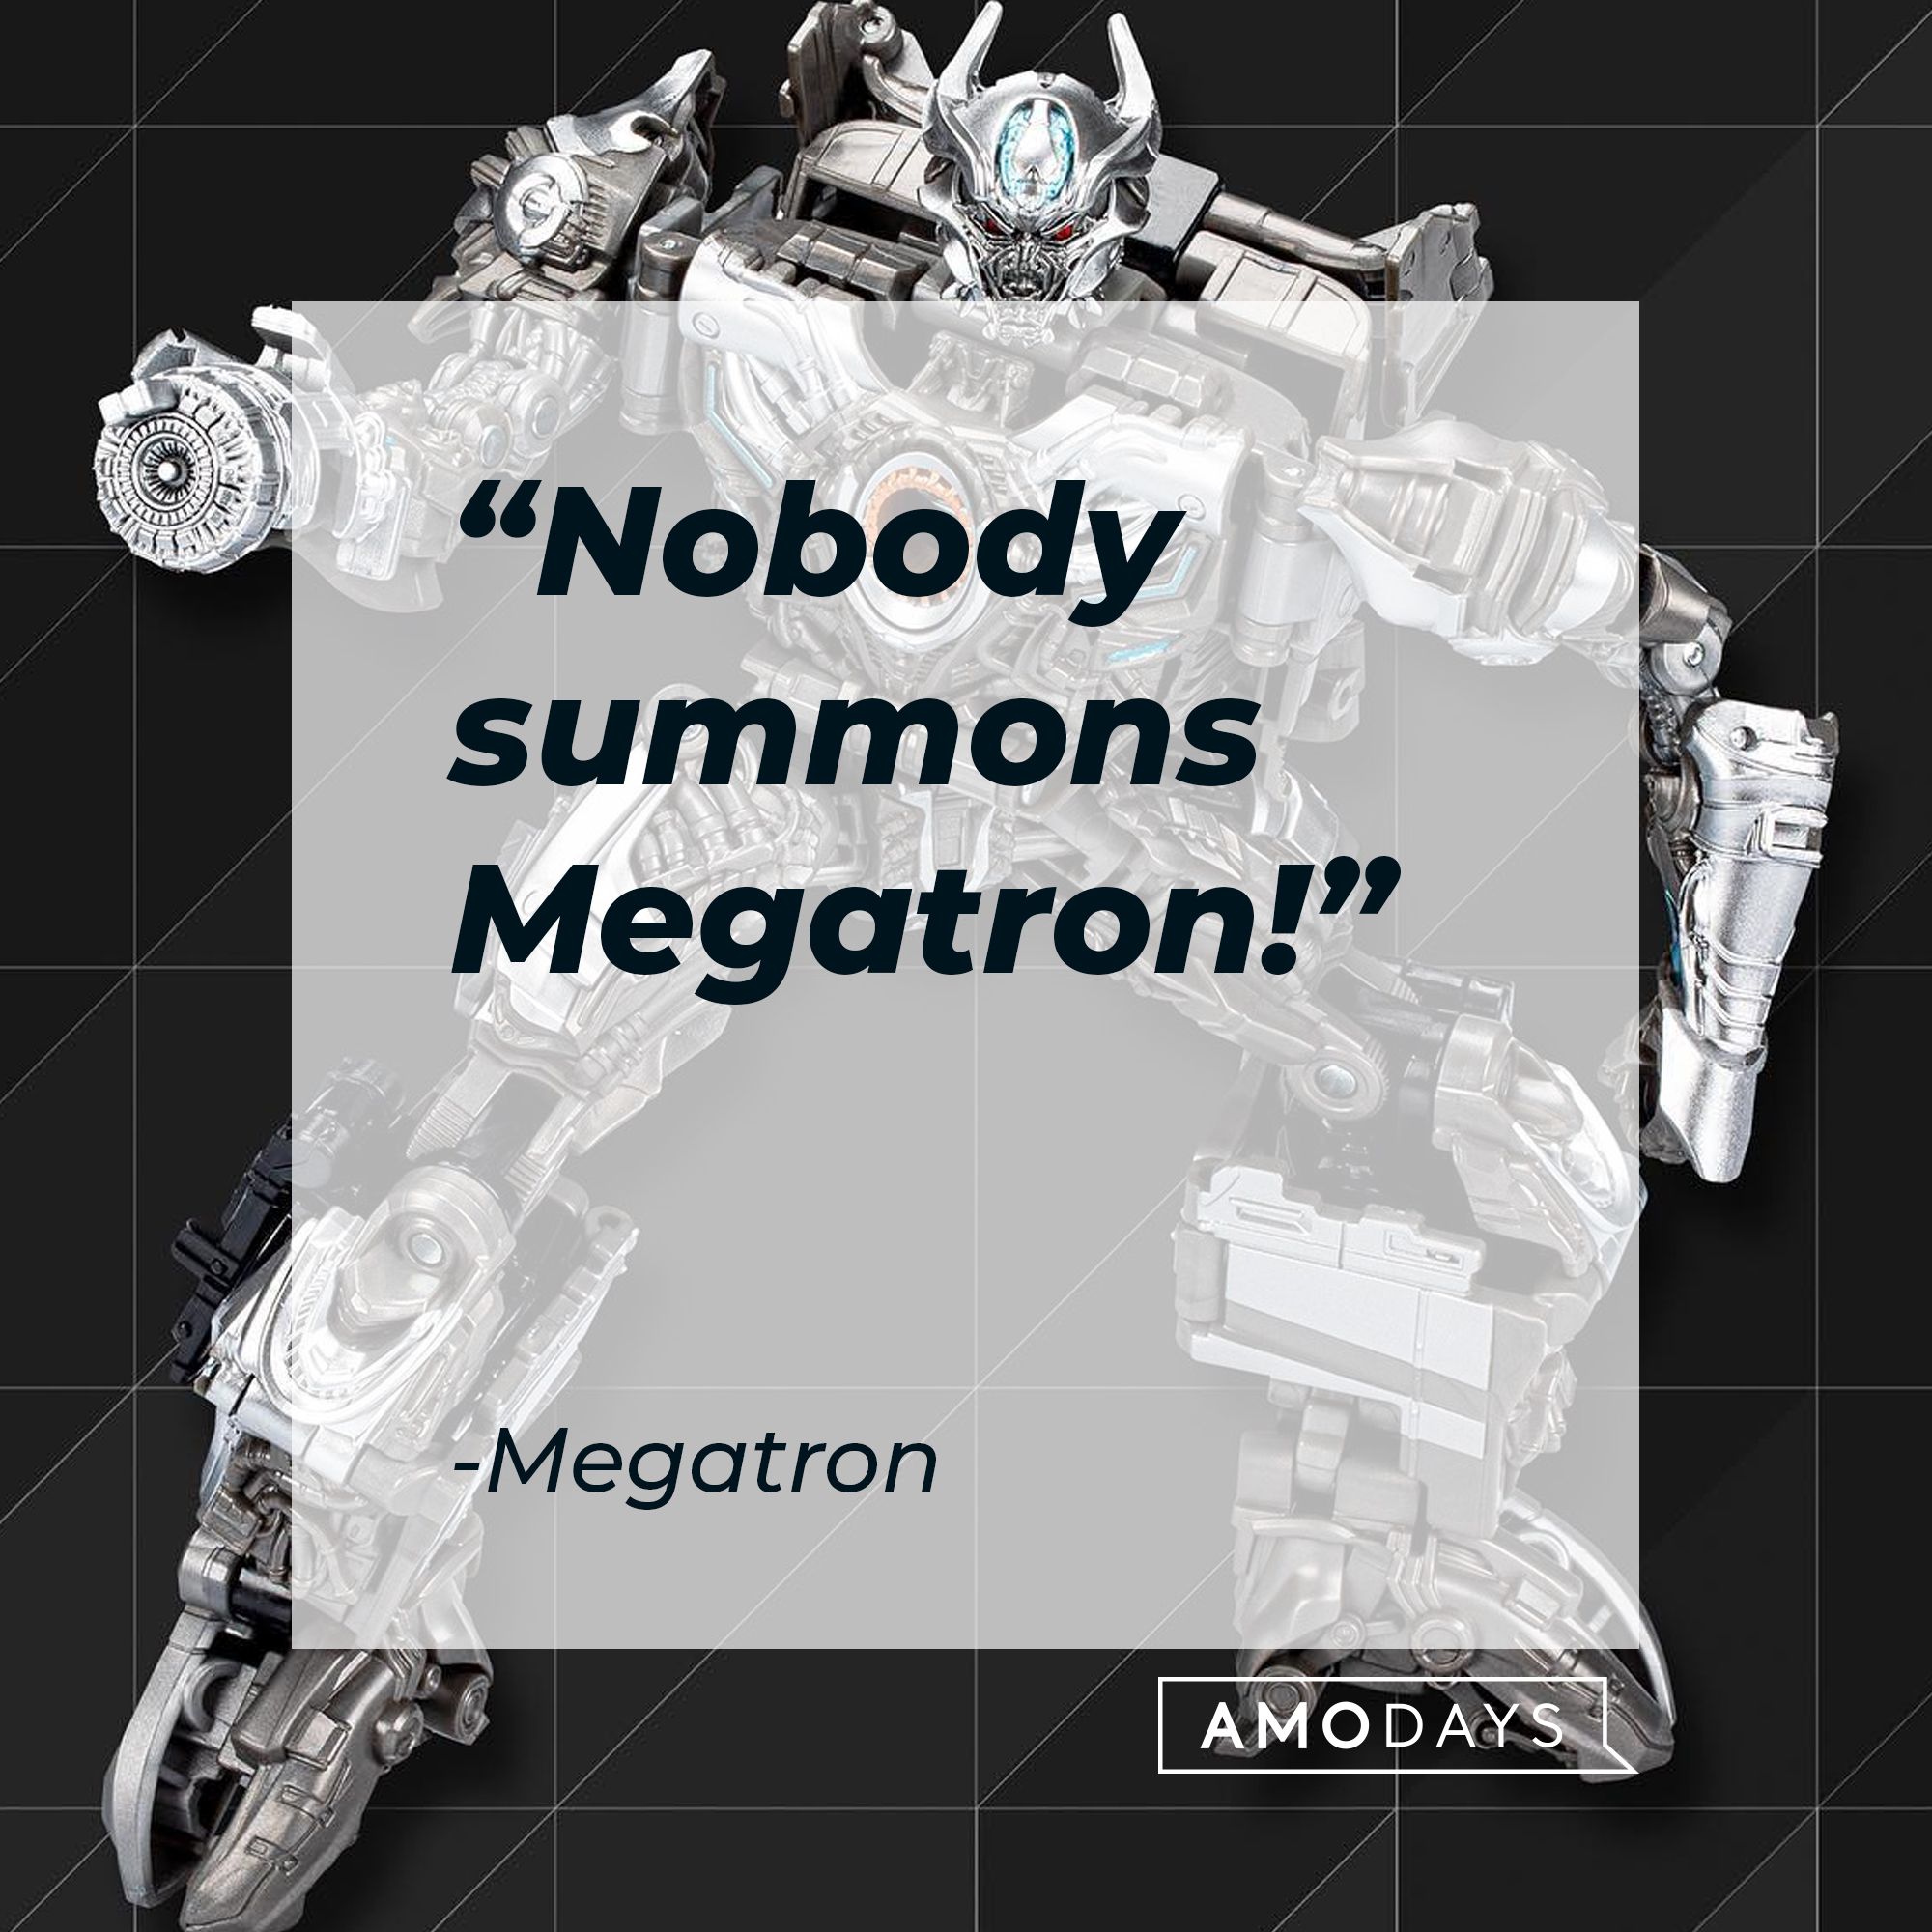 A photo of Megatron with his quote, "Nobody summons Megatron!" | Source: Facebook/transformers